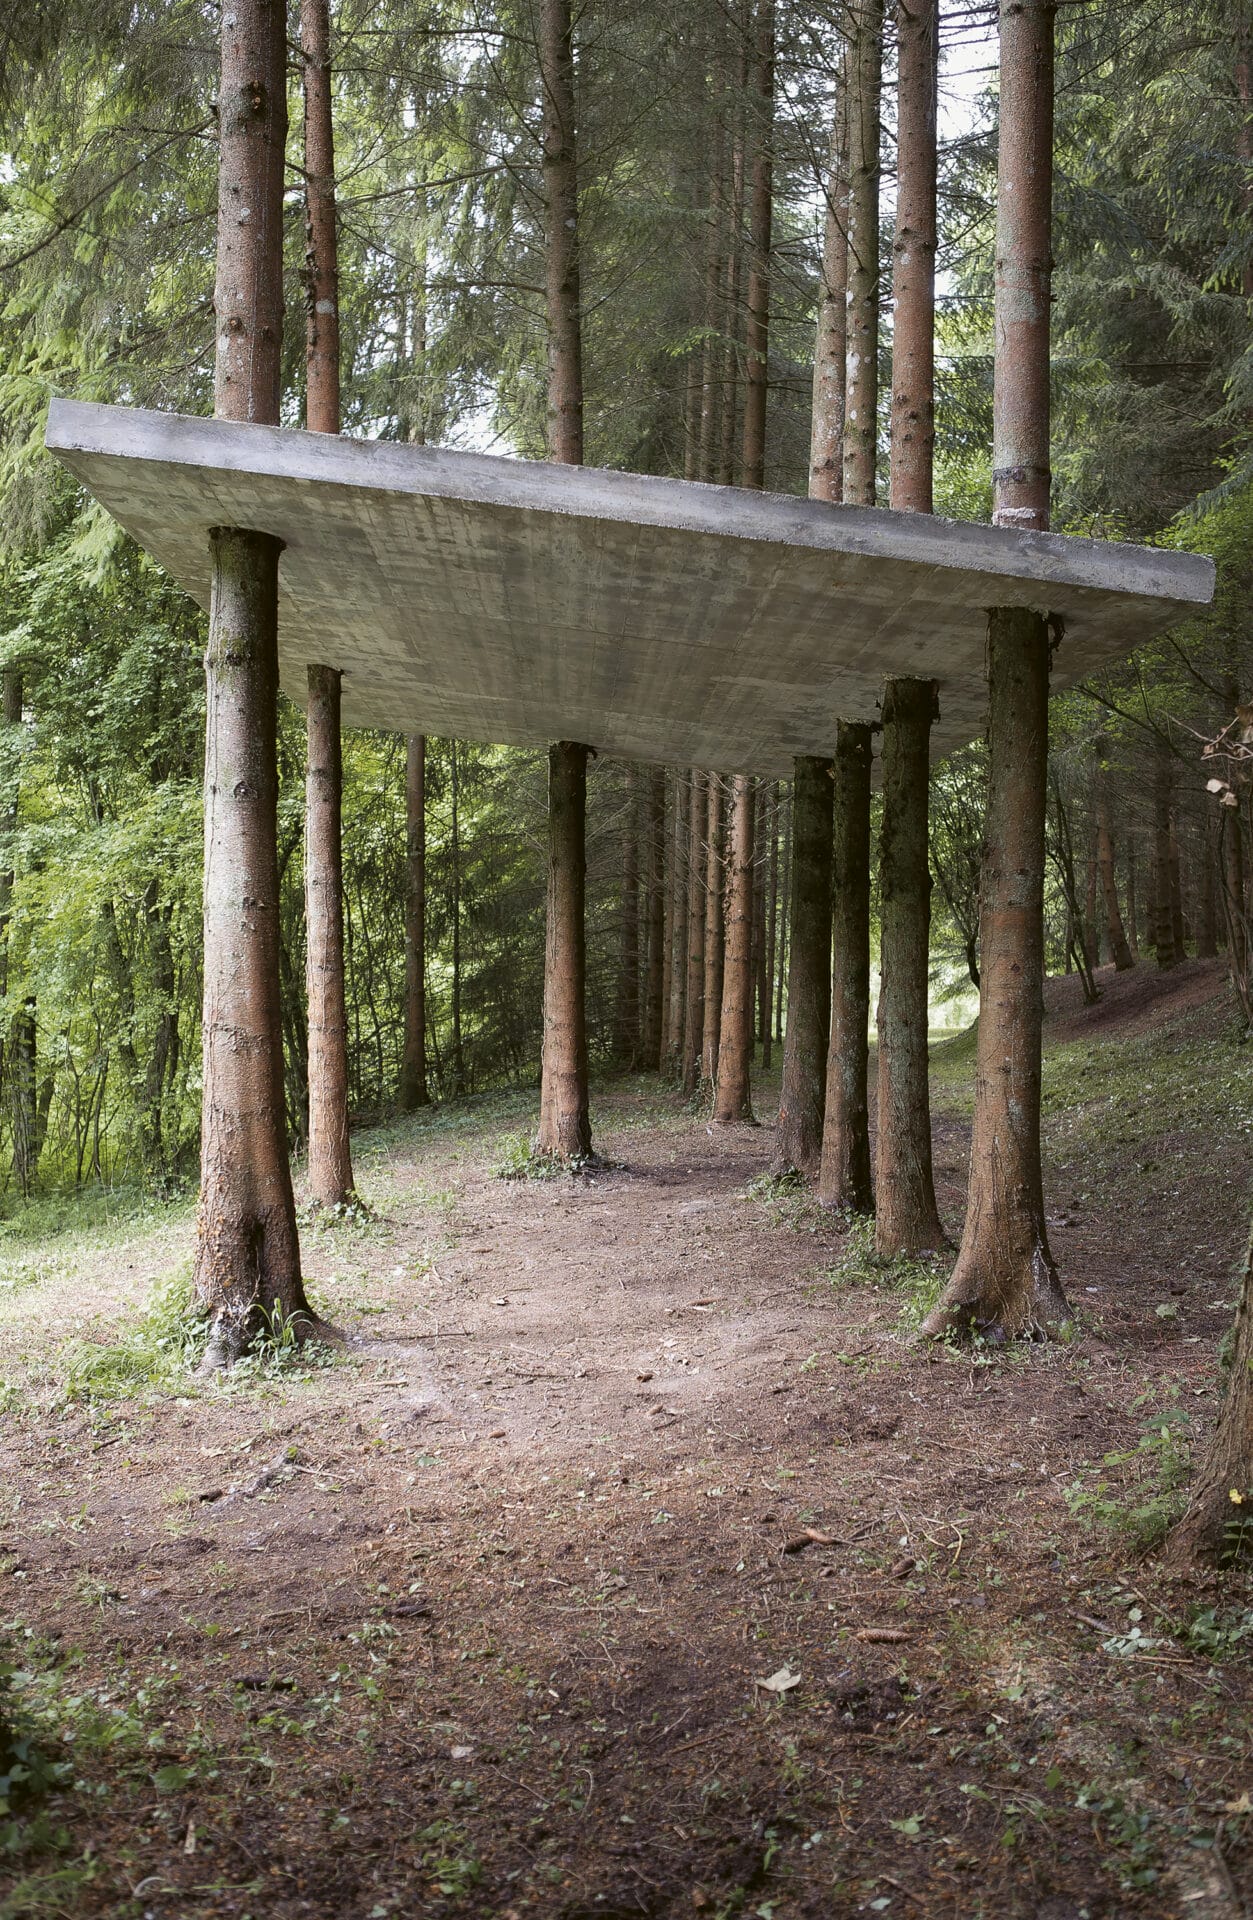 a group of trees with a concrete slab cast onto their trunks to create a shelter